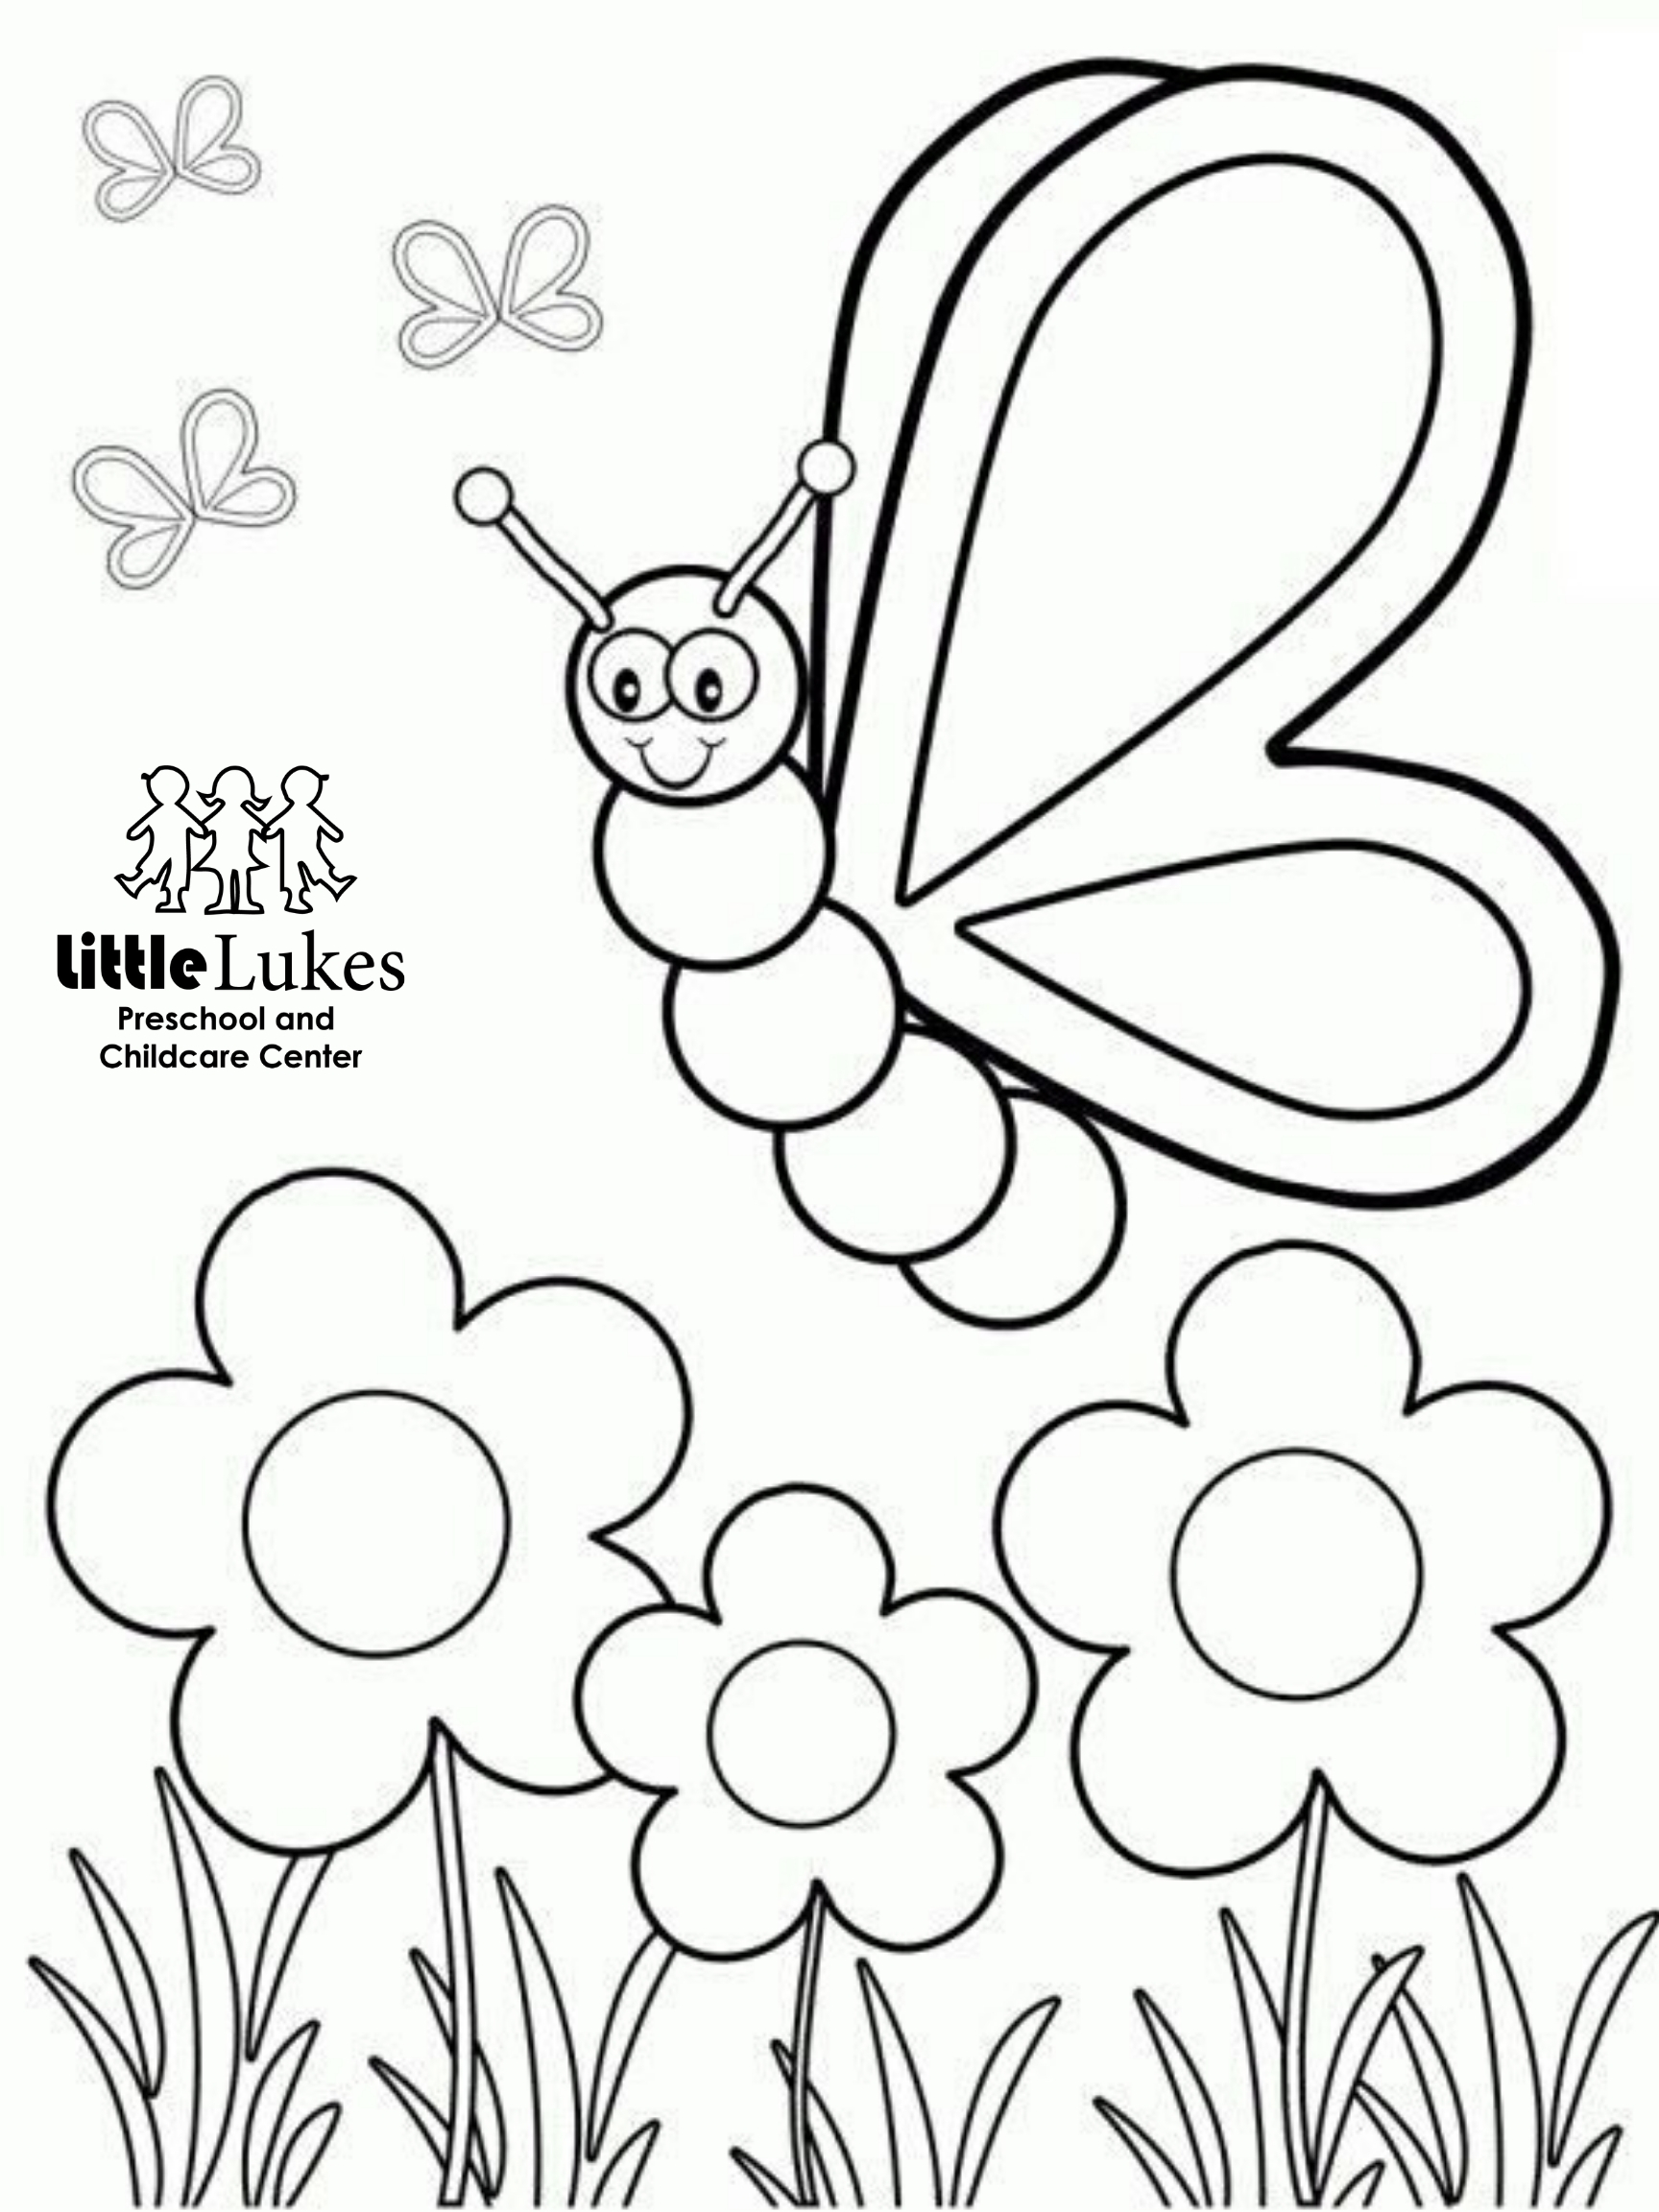 FREE Spring Coloring Pages! | Little Lukes Preschool and ...